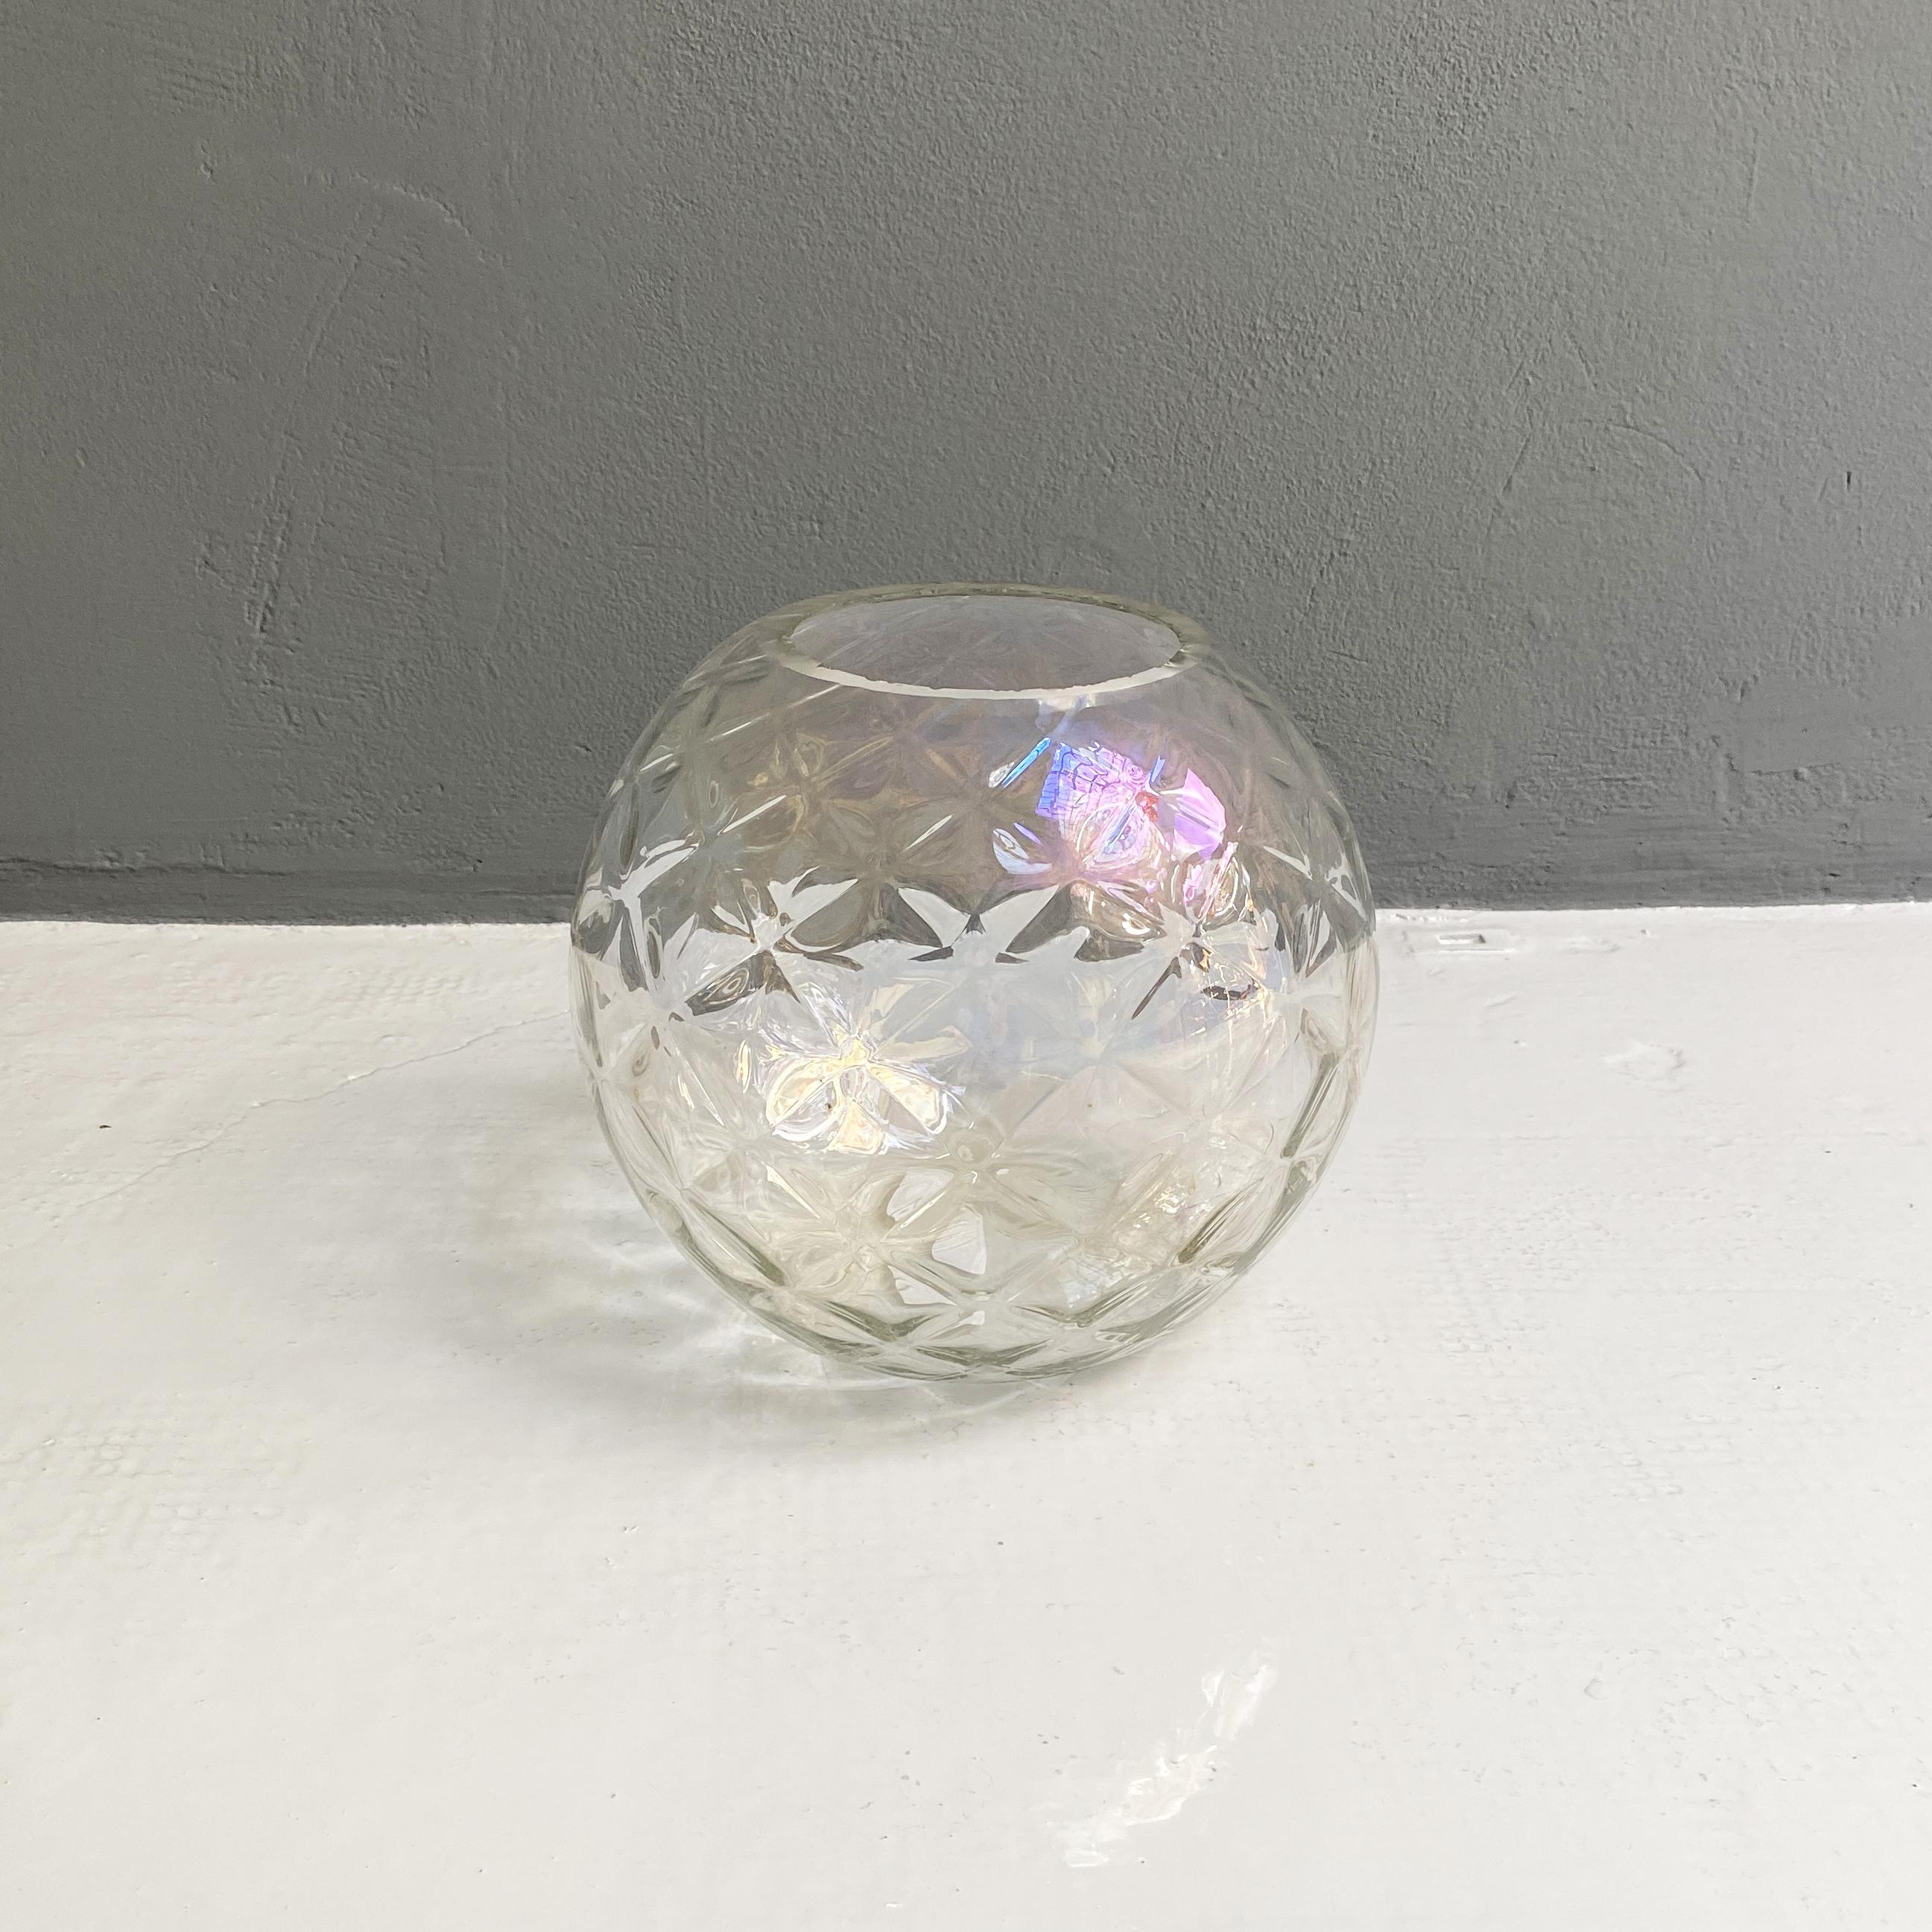 Italian Modern Transparent Spherical Glass Vase with Rhomboidal Motifs, 1980s In Good Condition For Sale In MIlano, IT